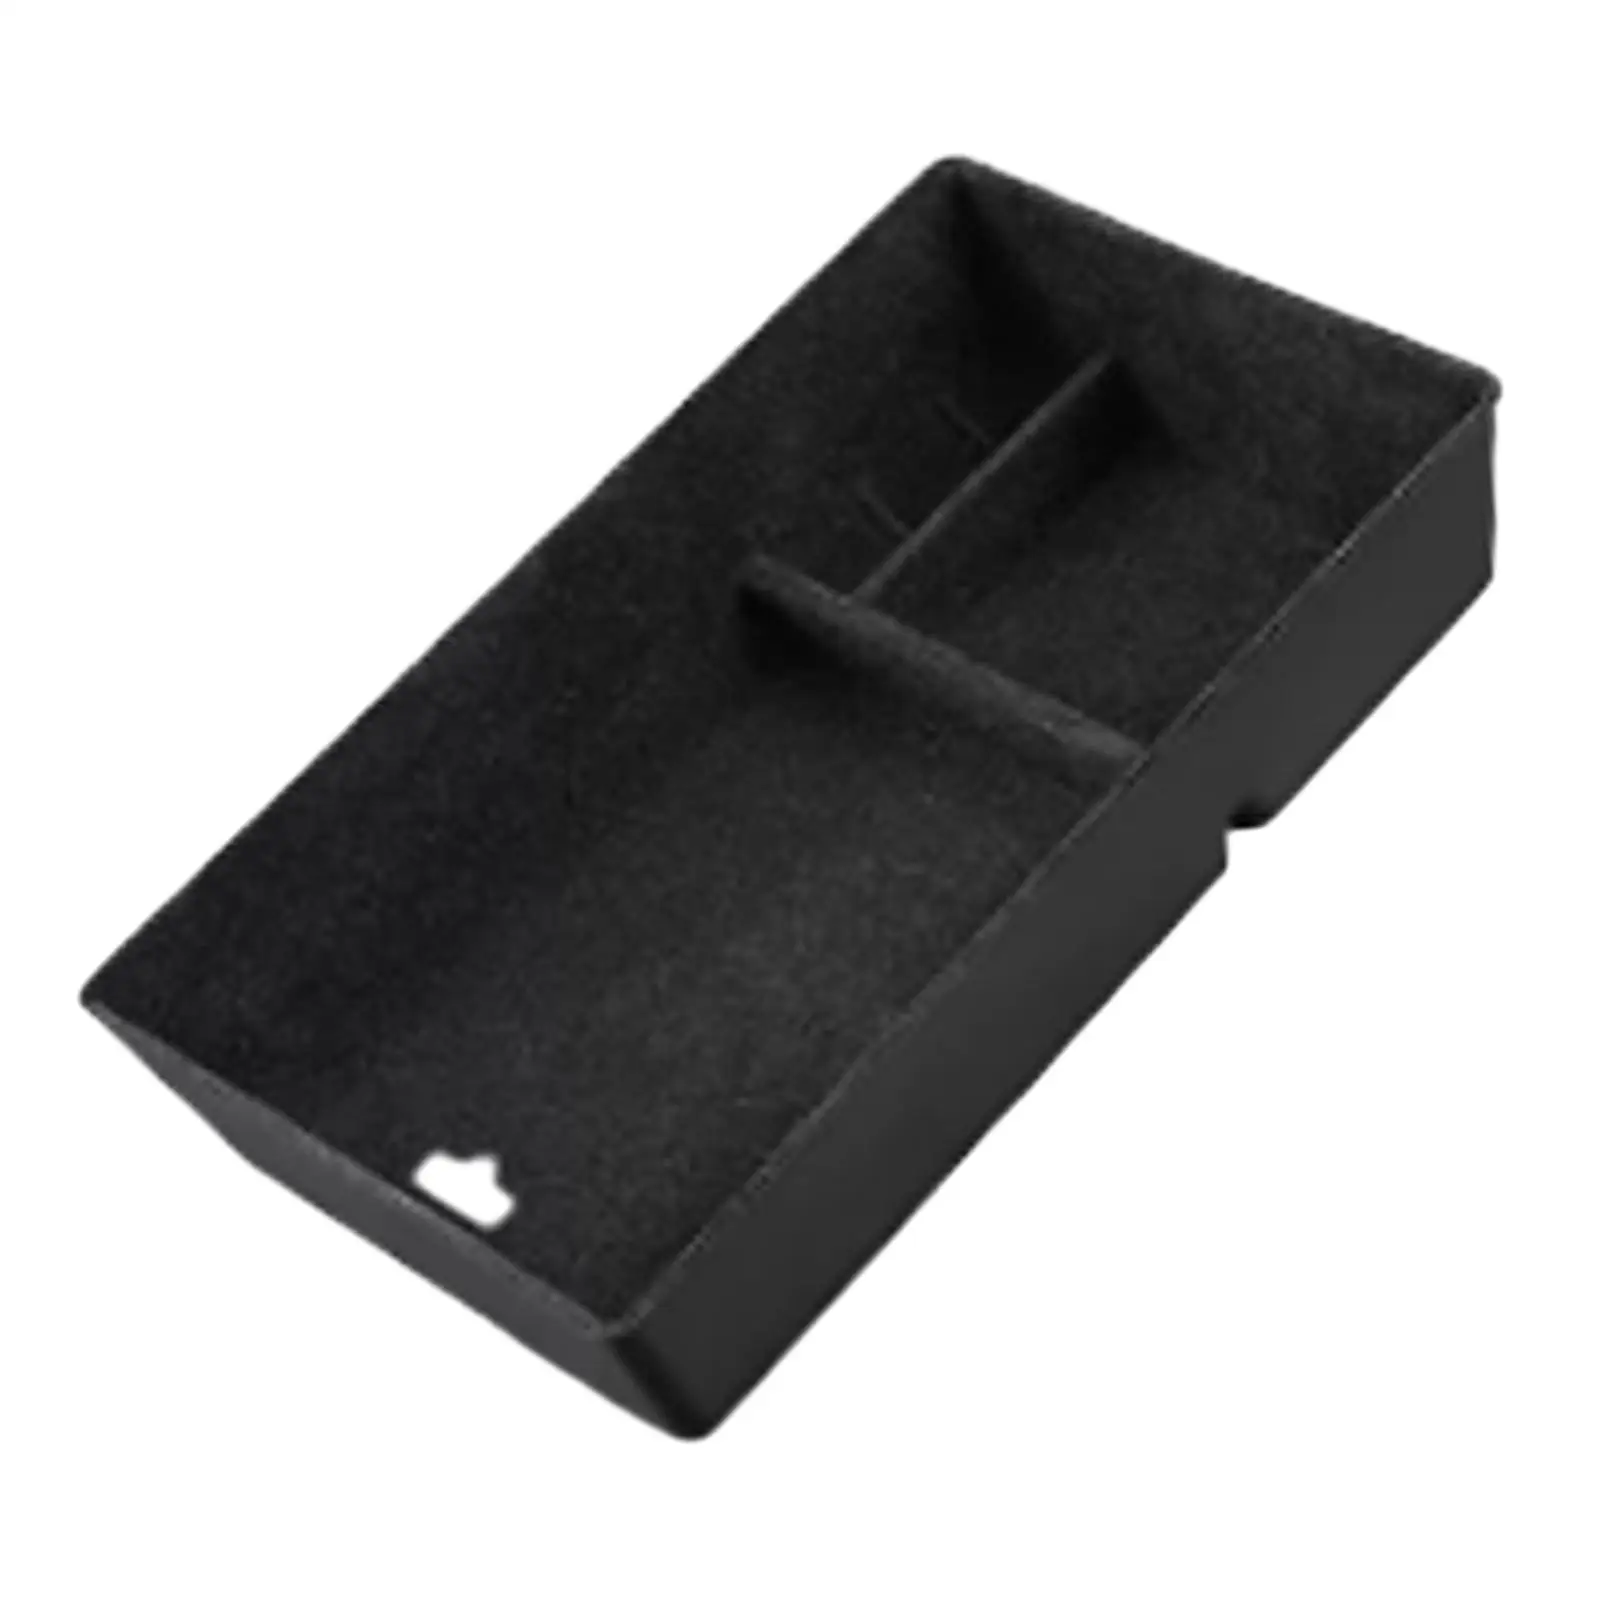 Armrest Storage Practical Car Accessory Keep Organized Storage Tray for Mercedes Benz 2022 to 2024 Replacement Easily Install